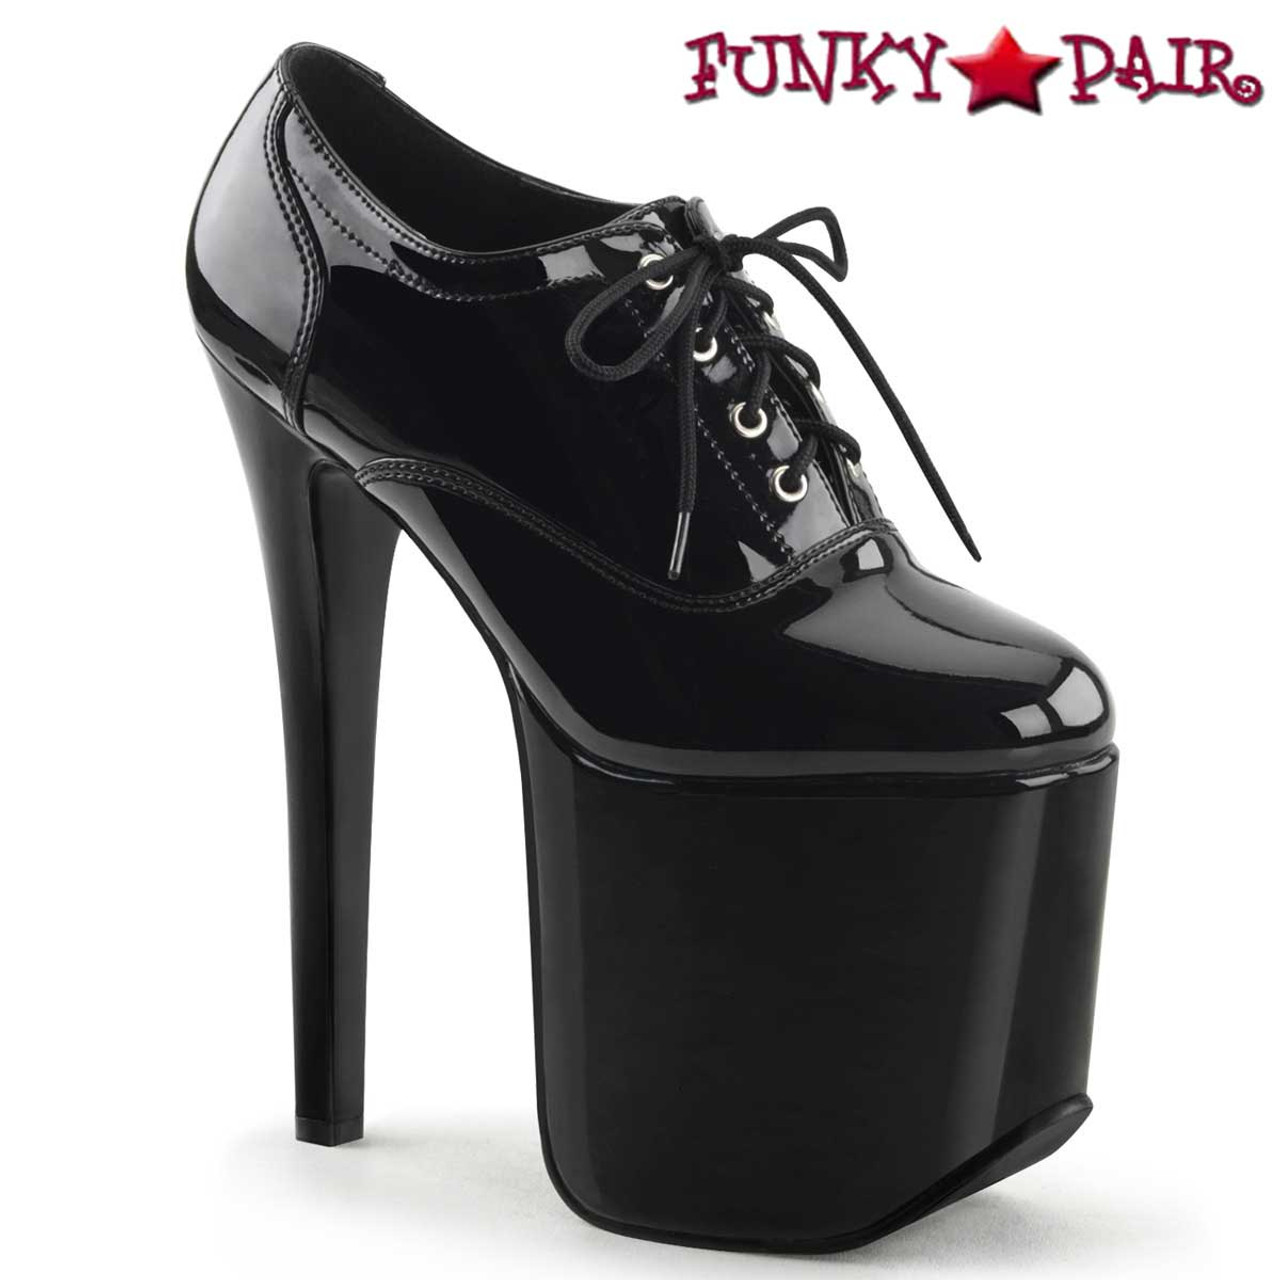 Devious | Tramp-788, 7.25 Inch Fetish Oxford Shoes by Pleaser